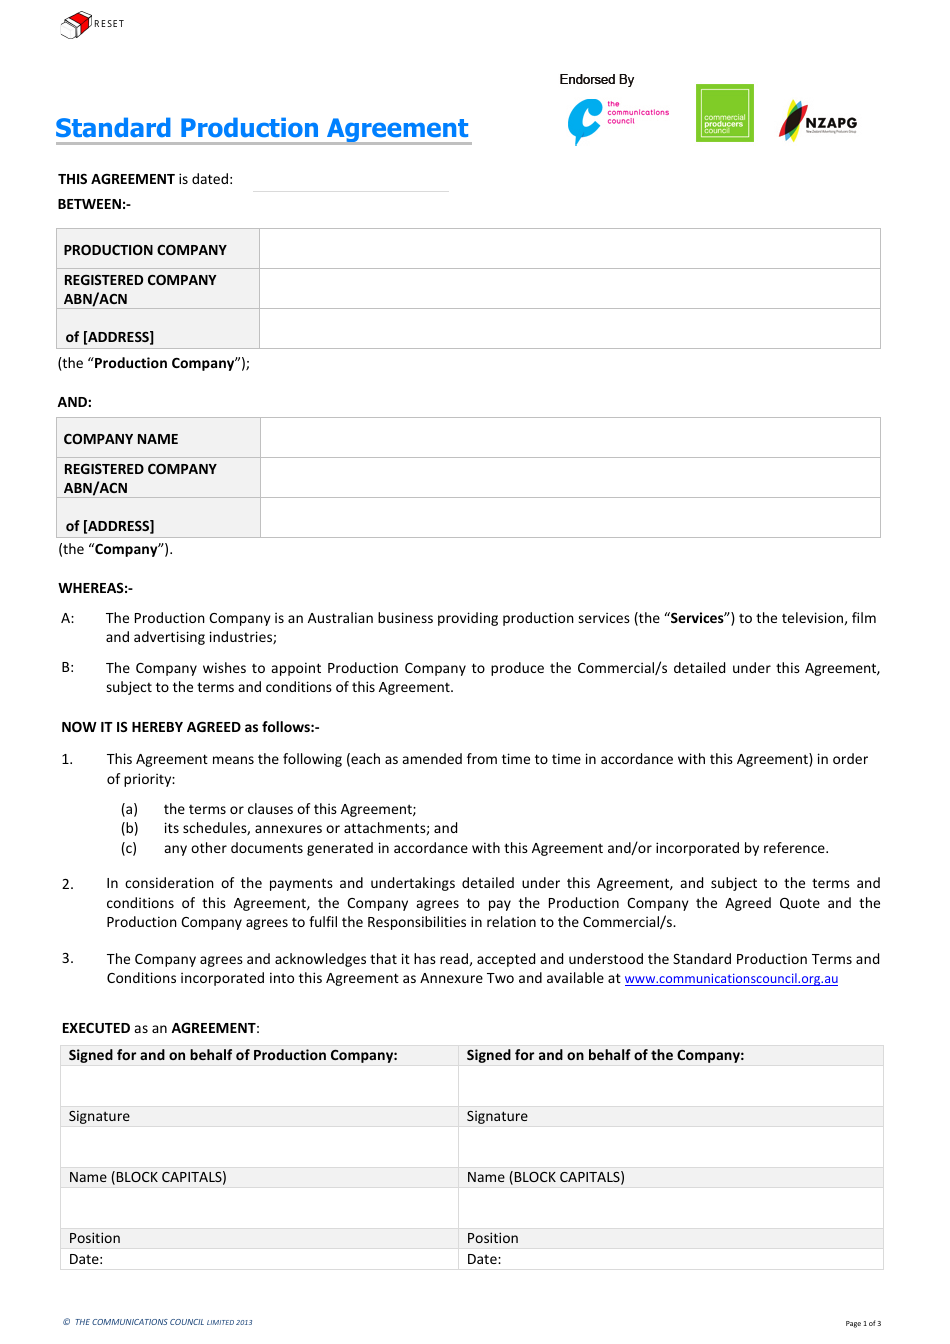 Standard Production Agreement Template - the Communications Council - Australia, Page 1